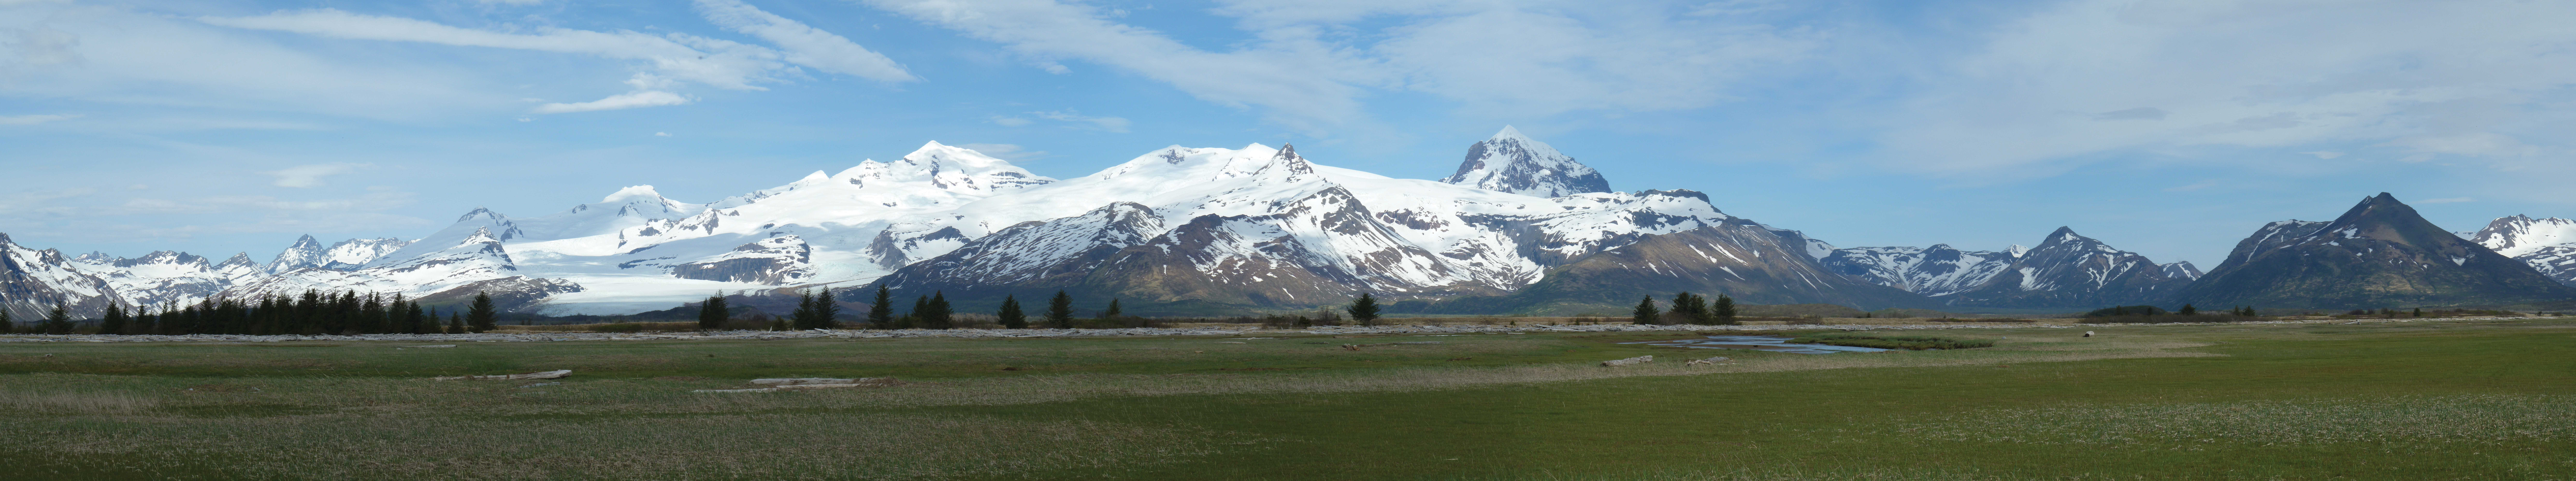 meadow in foreground and snow capped volcanoes on the horizon